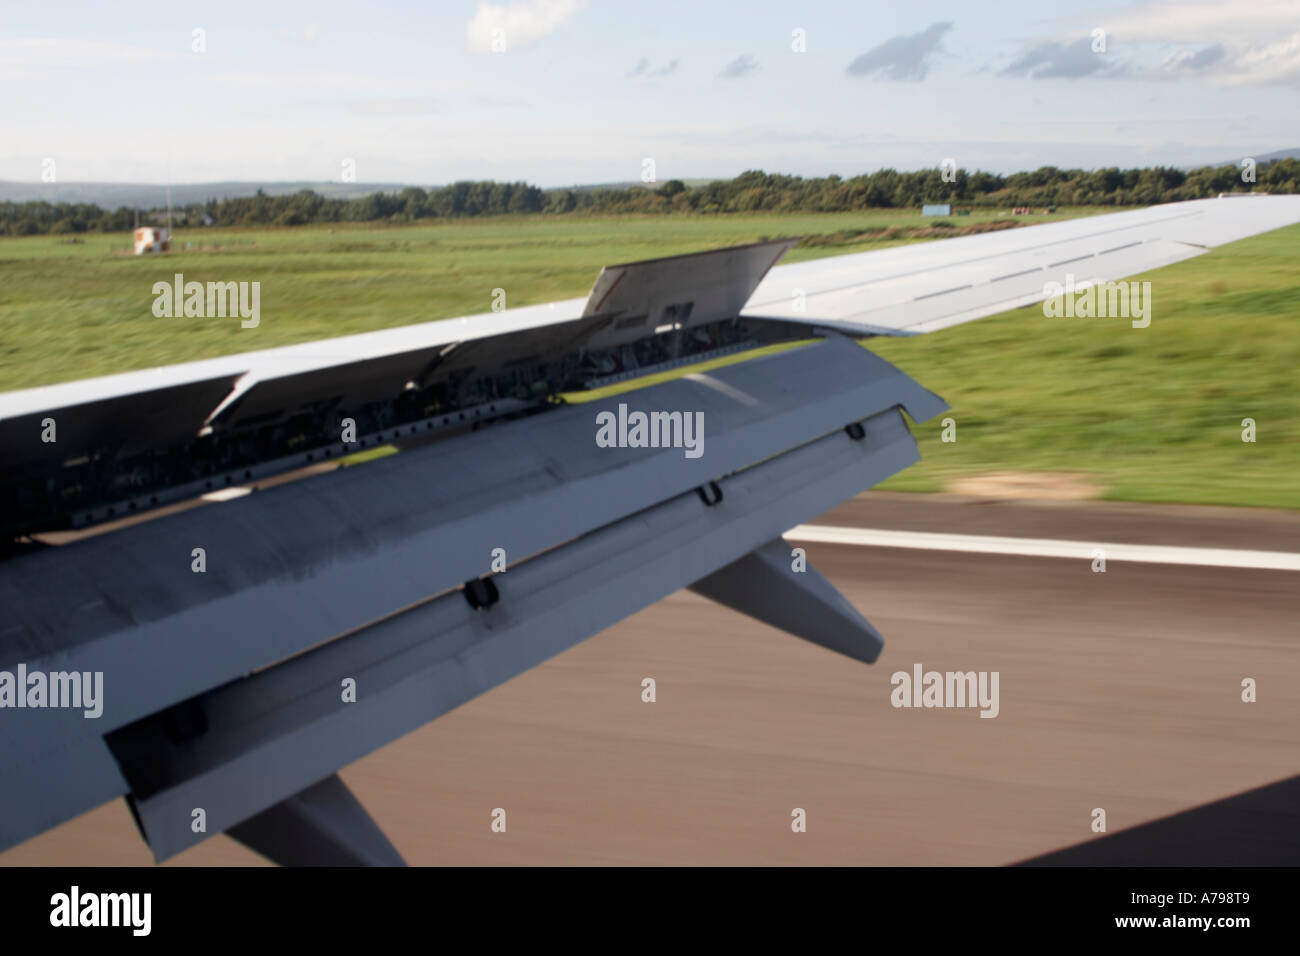 Boeing 737 aircraft wing with flaps down and lowered and airbrakes or spoilers up Landing on a runway Stock Photo